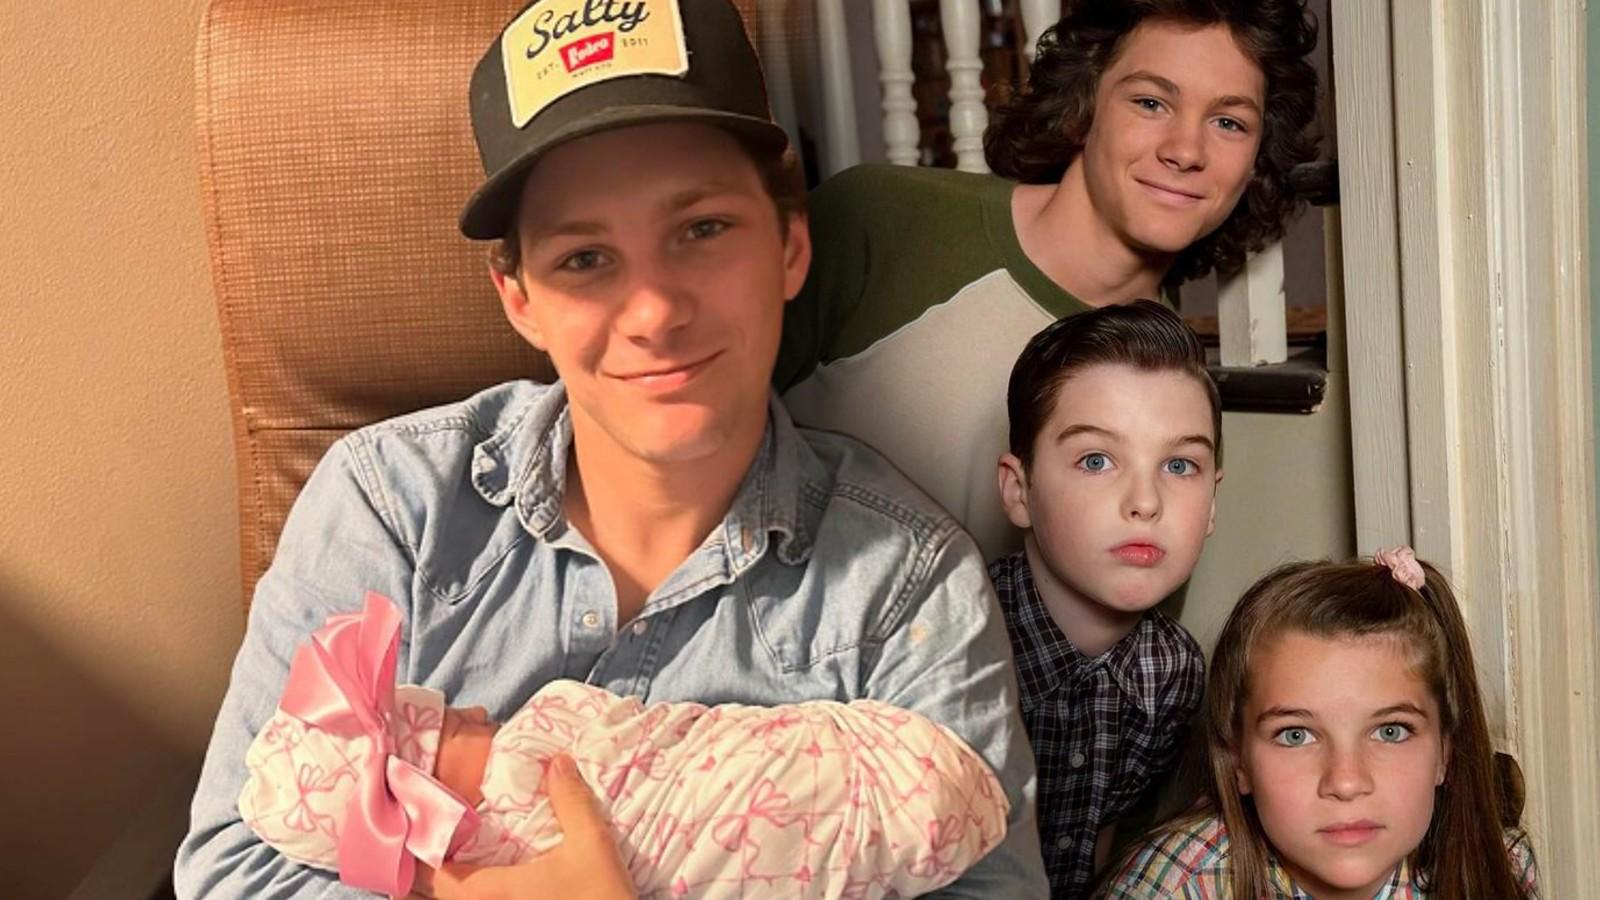 Montana Jordan with his baby and Georgie, Sheldon, and Missy in Young Sheldon